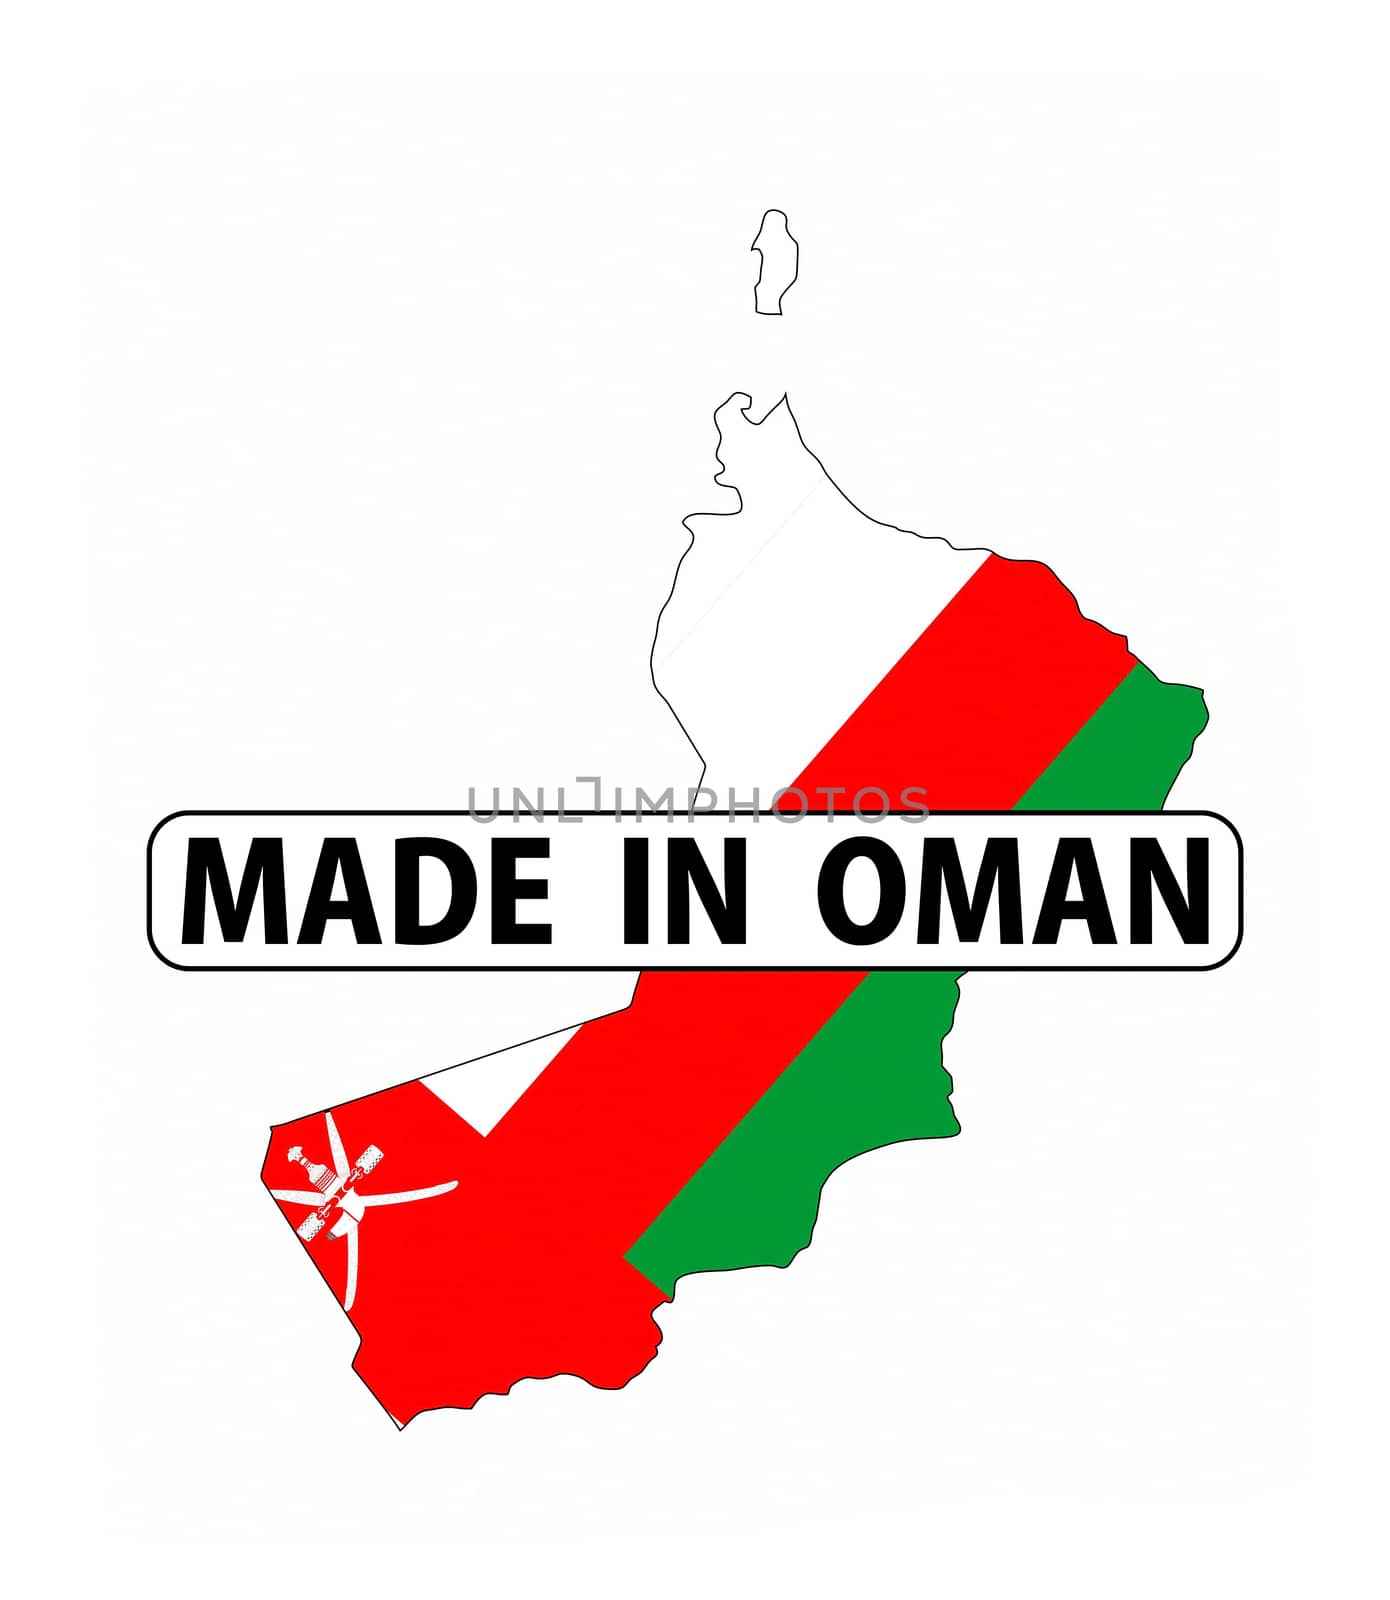 made in oman country national flag map shape with text